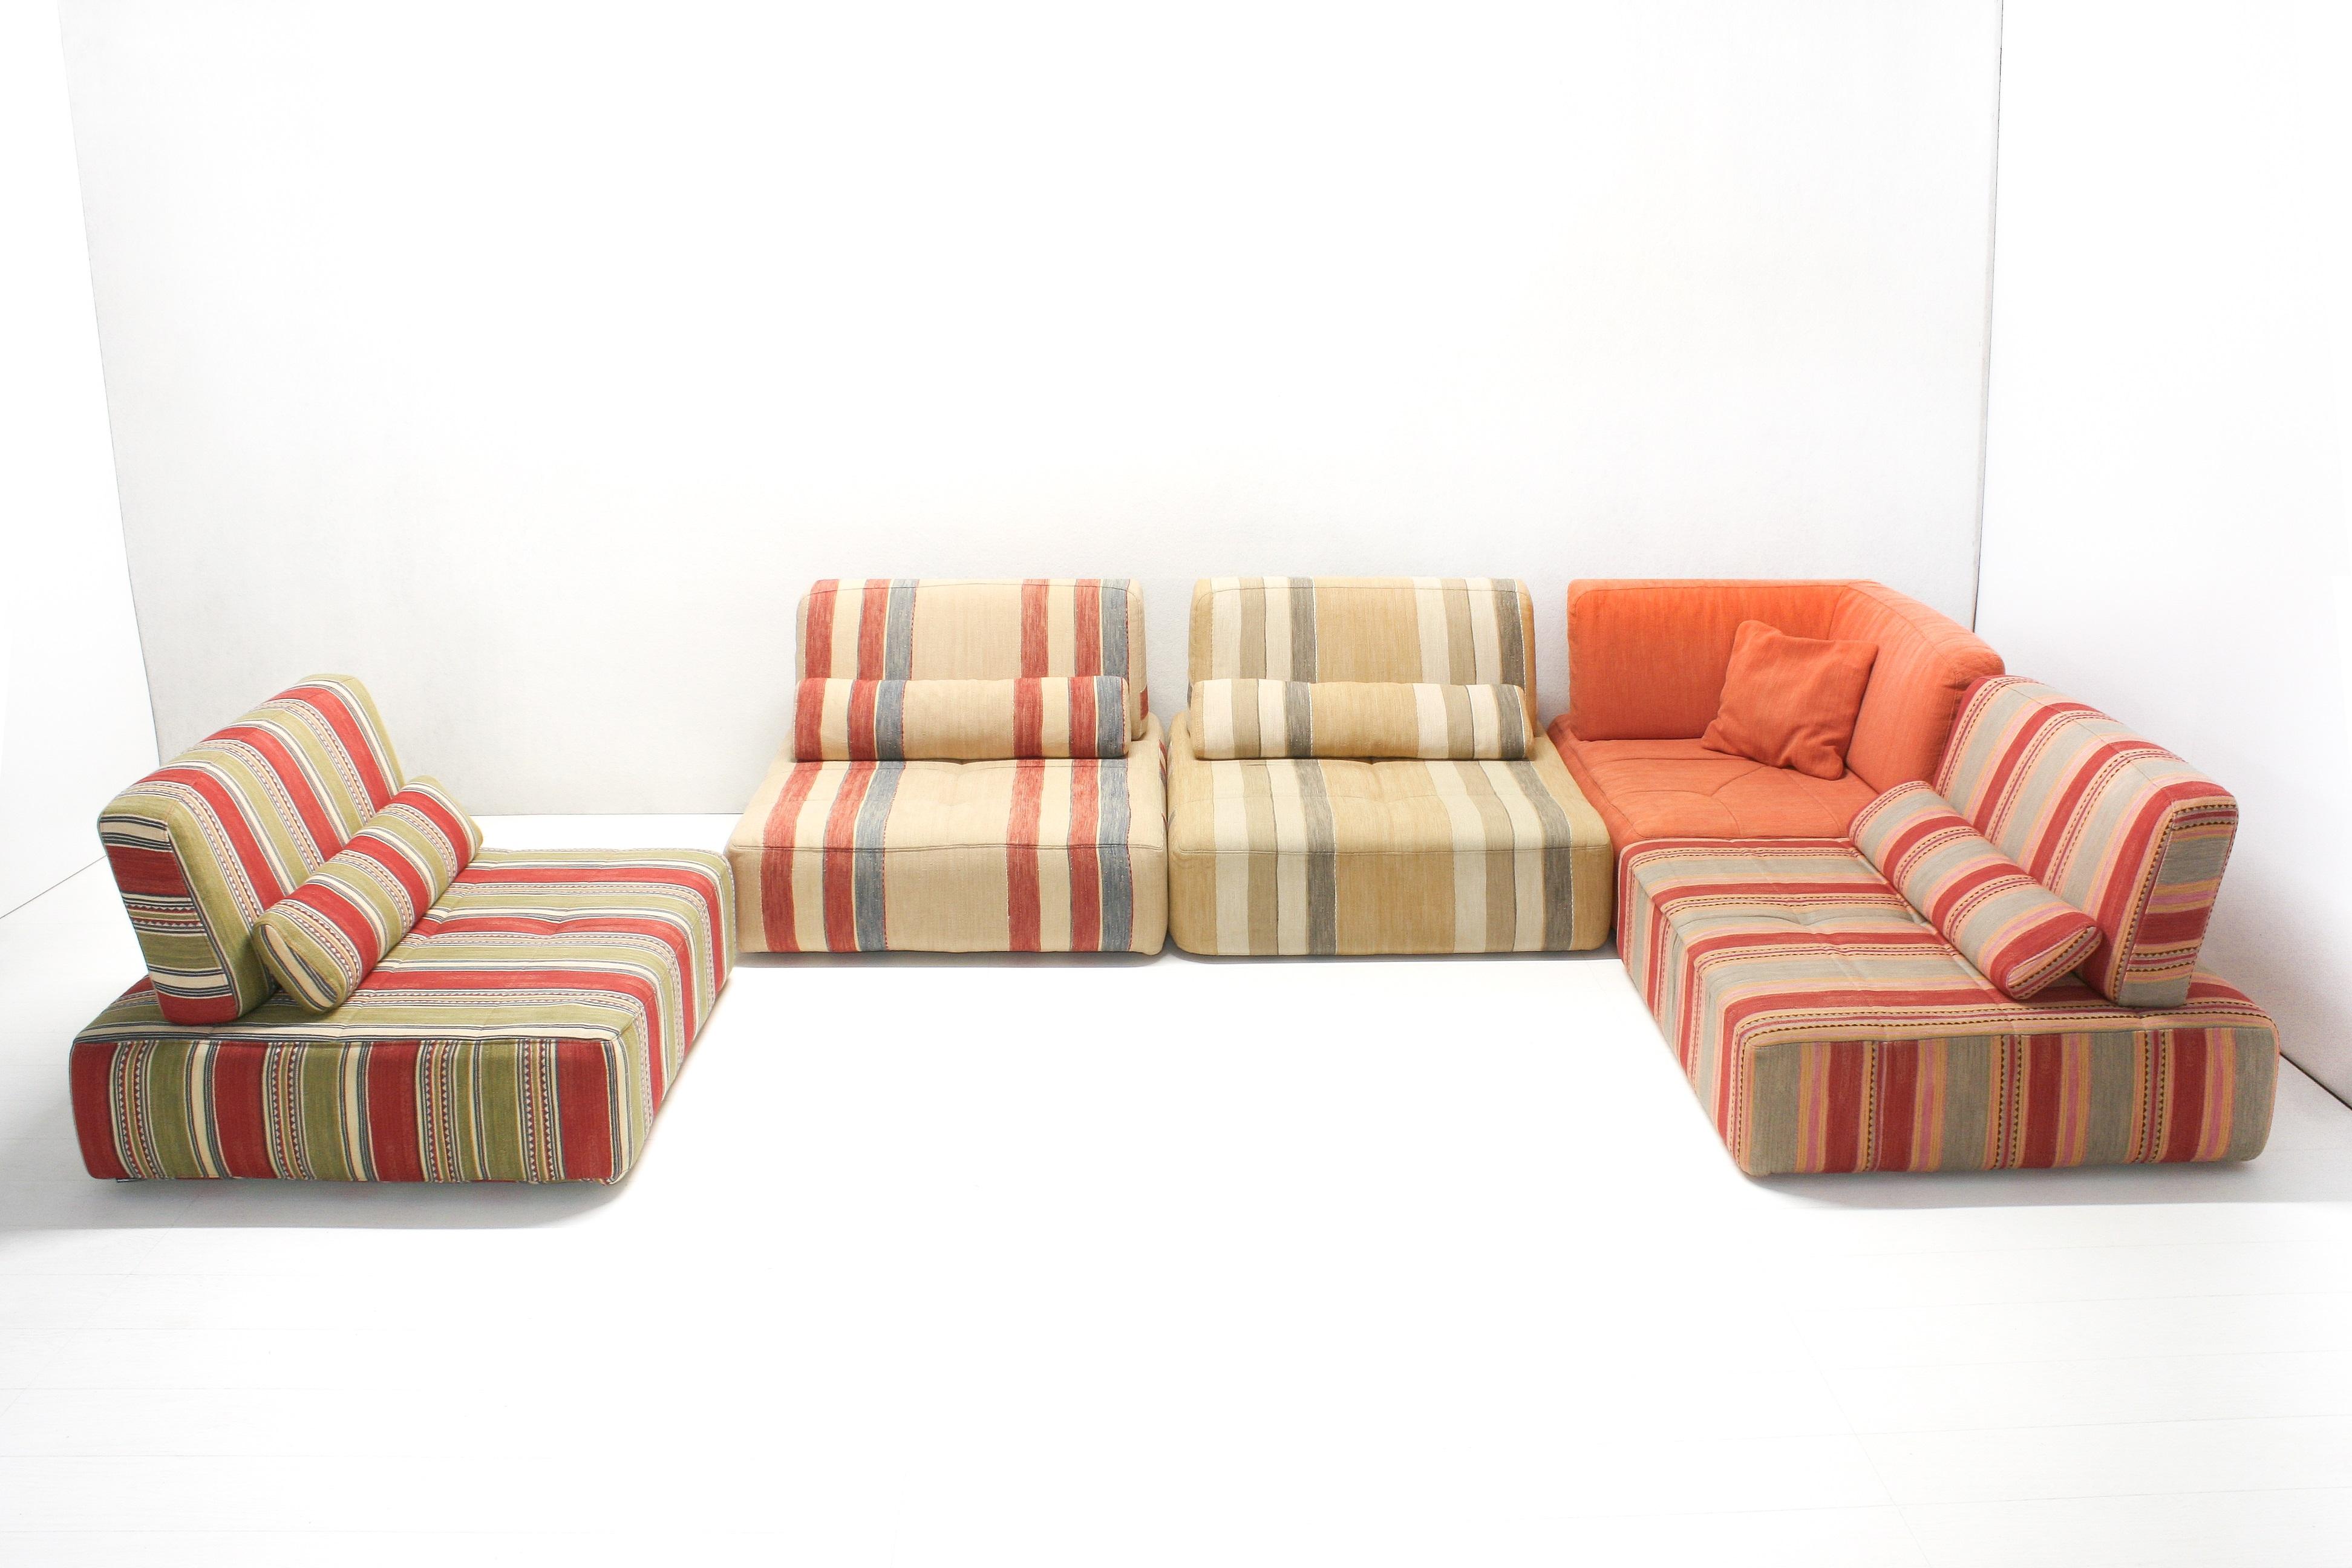 French Modular Parcours Voyage Immobile Fabric Sofa by Sacha Lakic for Roche Bobois